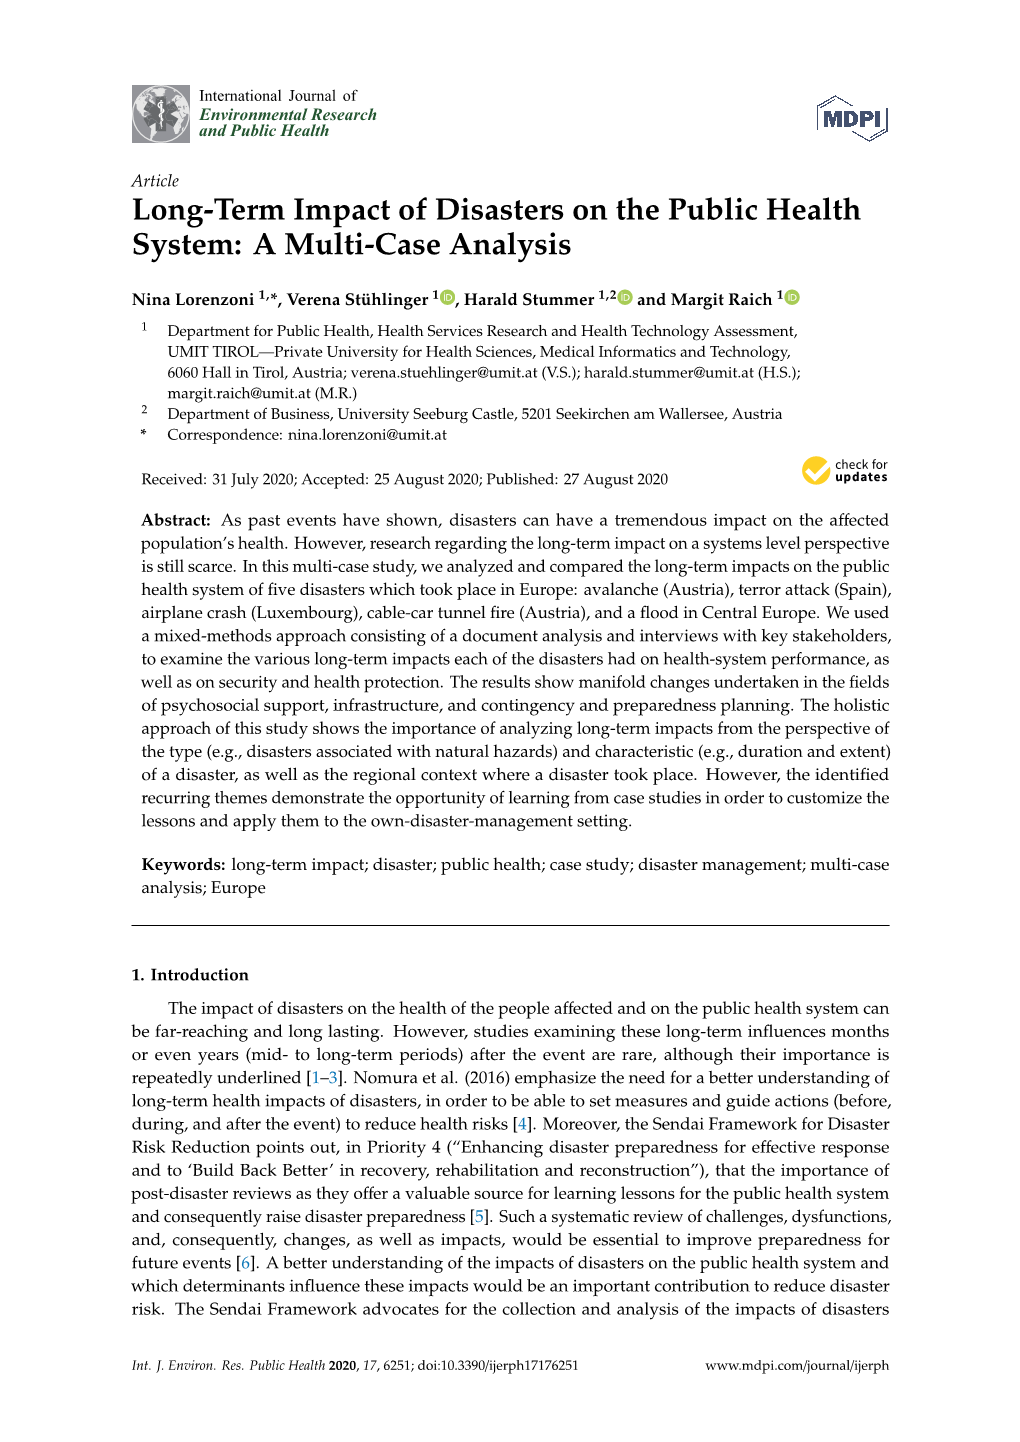 Long-Term Impact of Disasters on the Public Health System: a Multi-Case Analysis